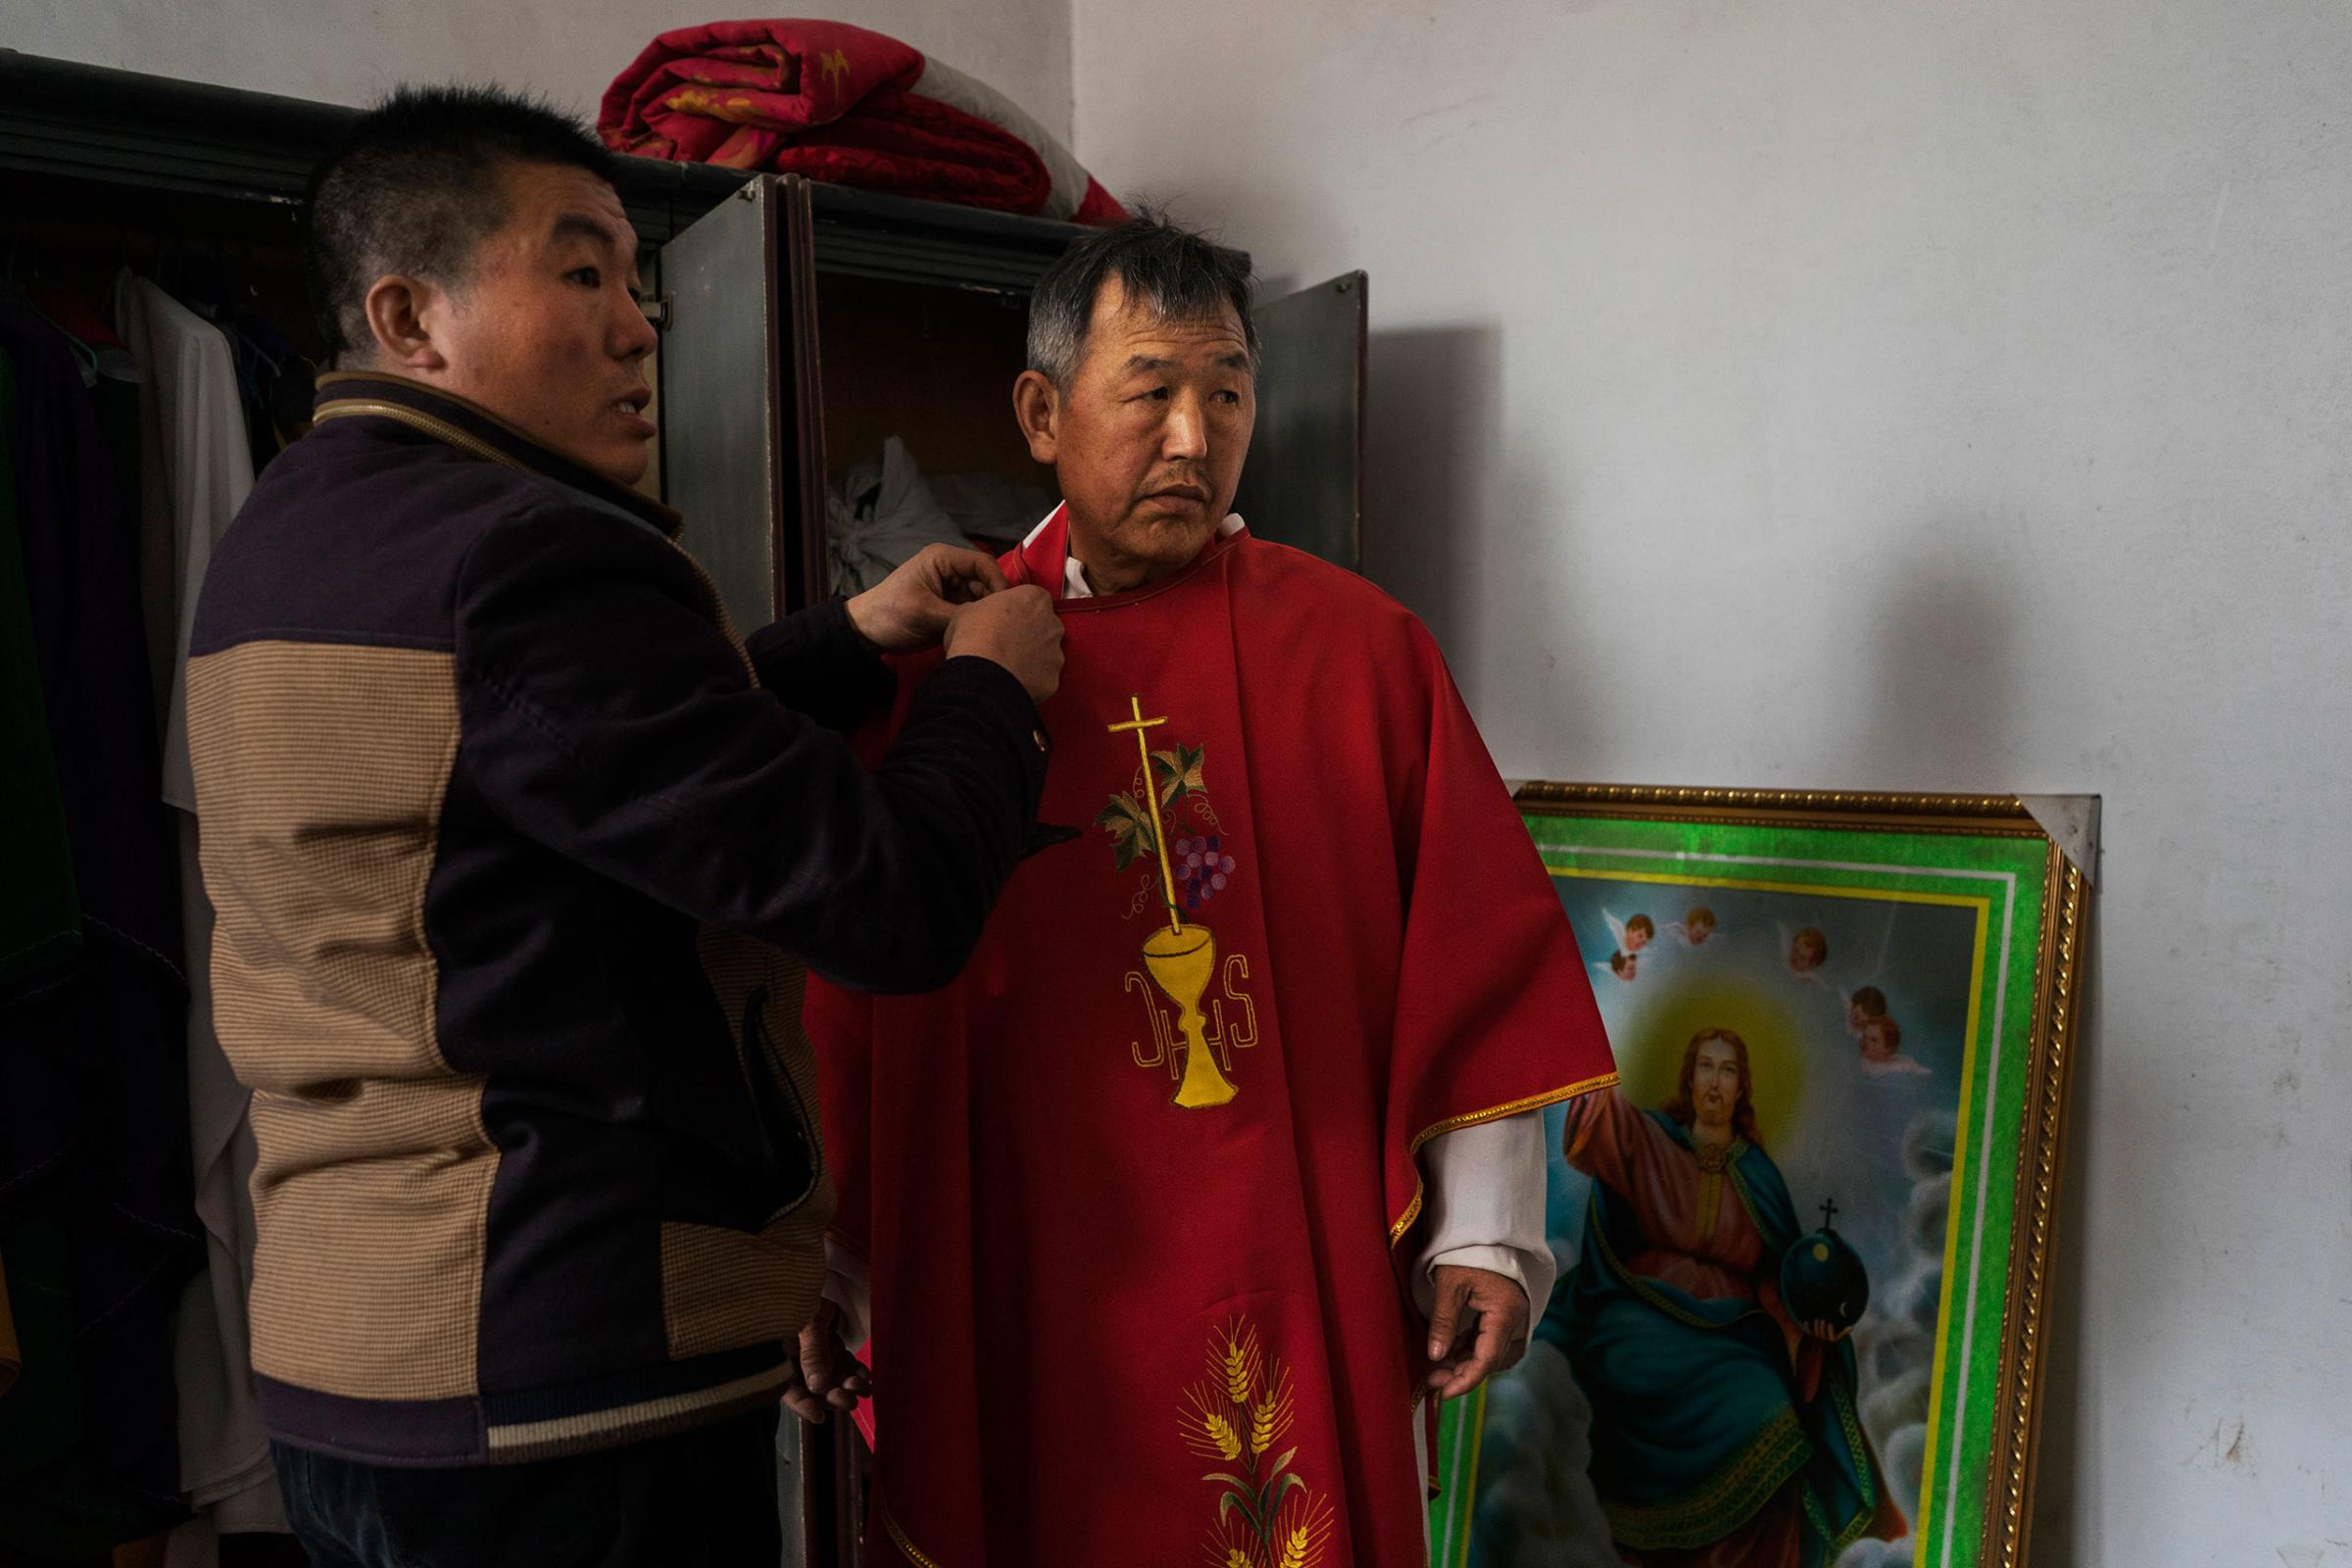 Dong Baolu, a dissident Catholic priest, is helped to dress ahead of a Palm Sunday service at an underground church service in the yard of a house in Youtong village, Shijiazhuang, China, March 20, 2016.